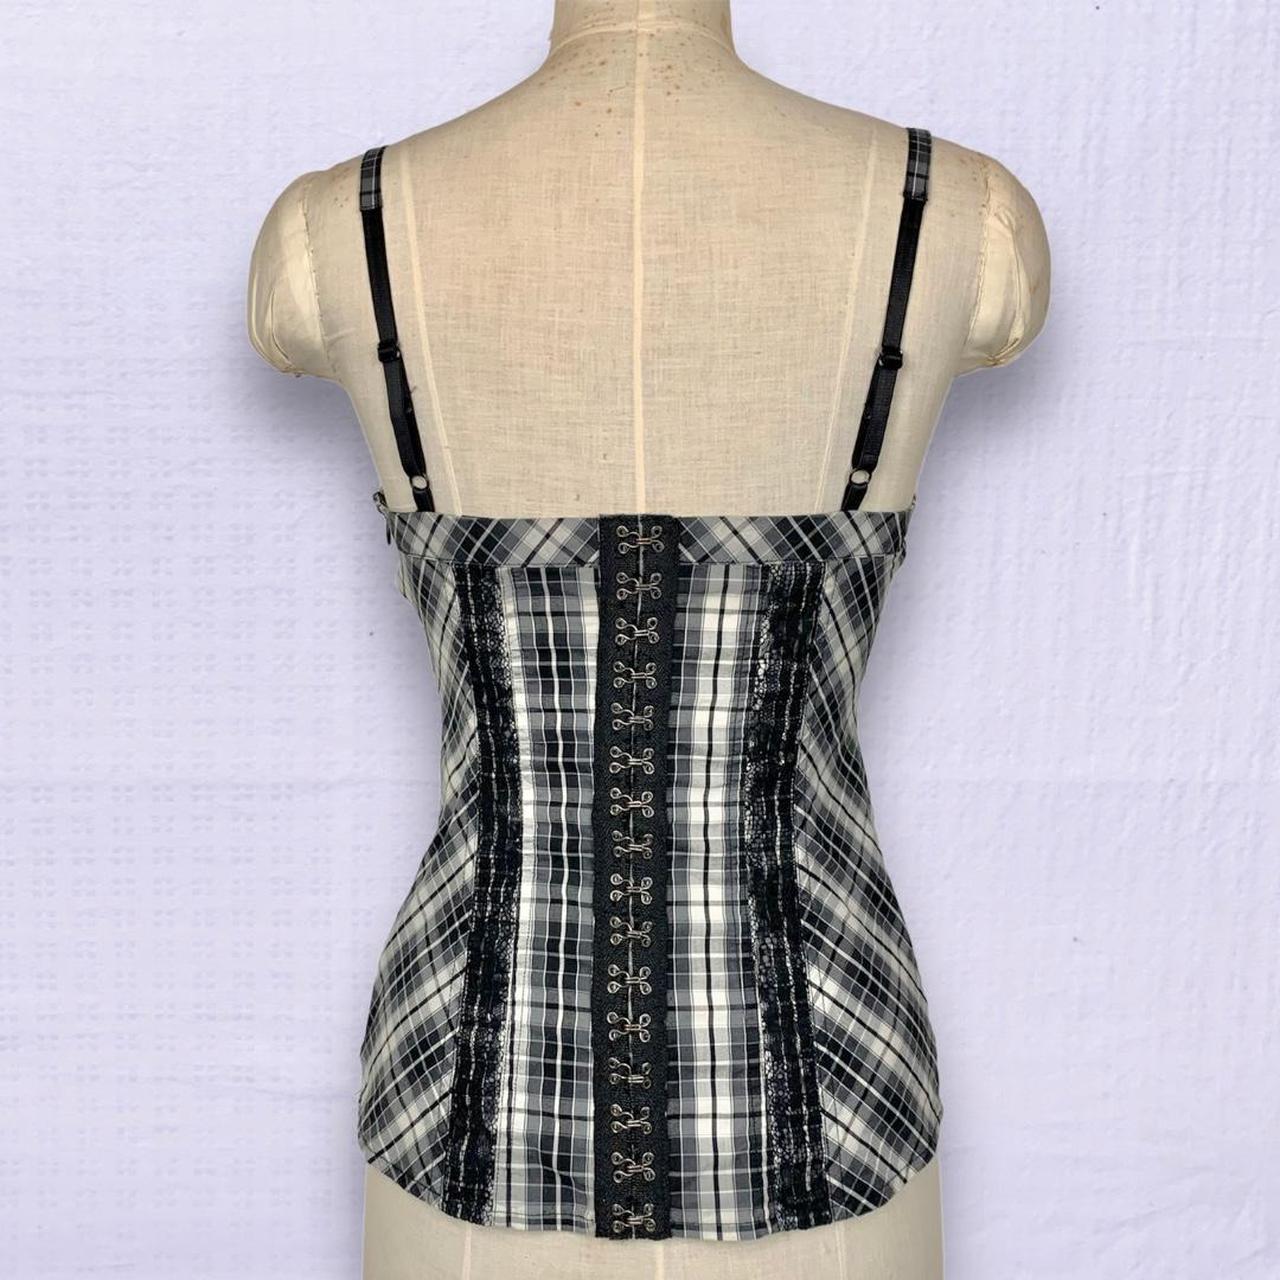 Guess, Tops, Black White Strapless Plaid Bustier By Guess Medium